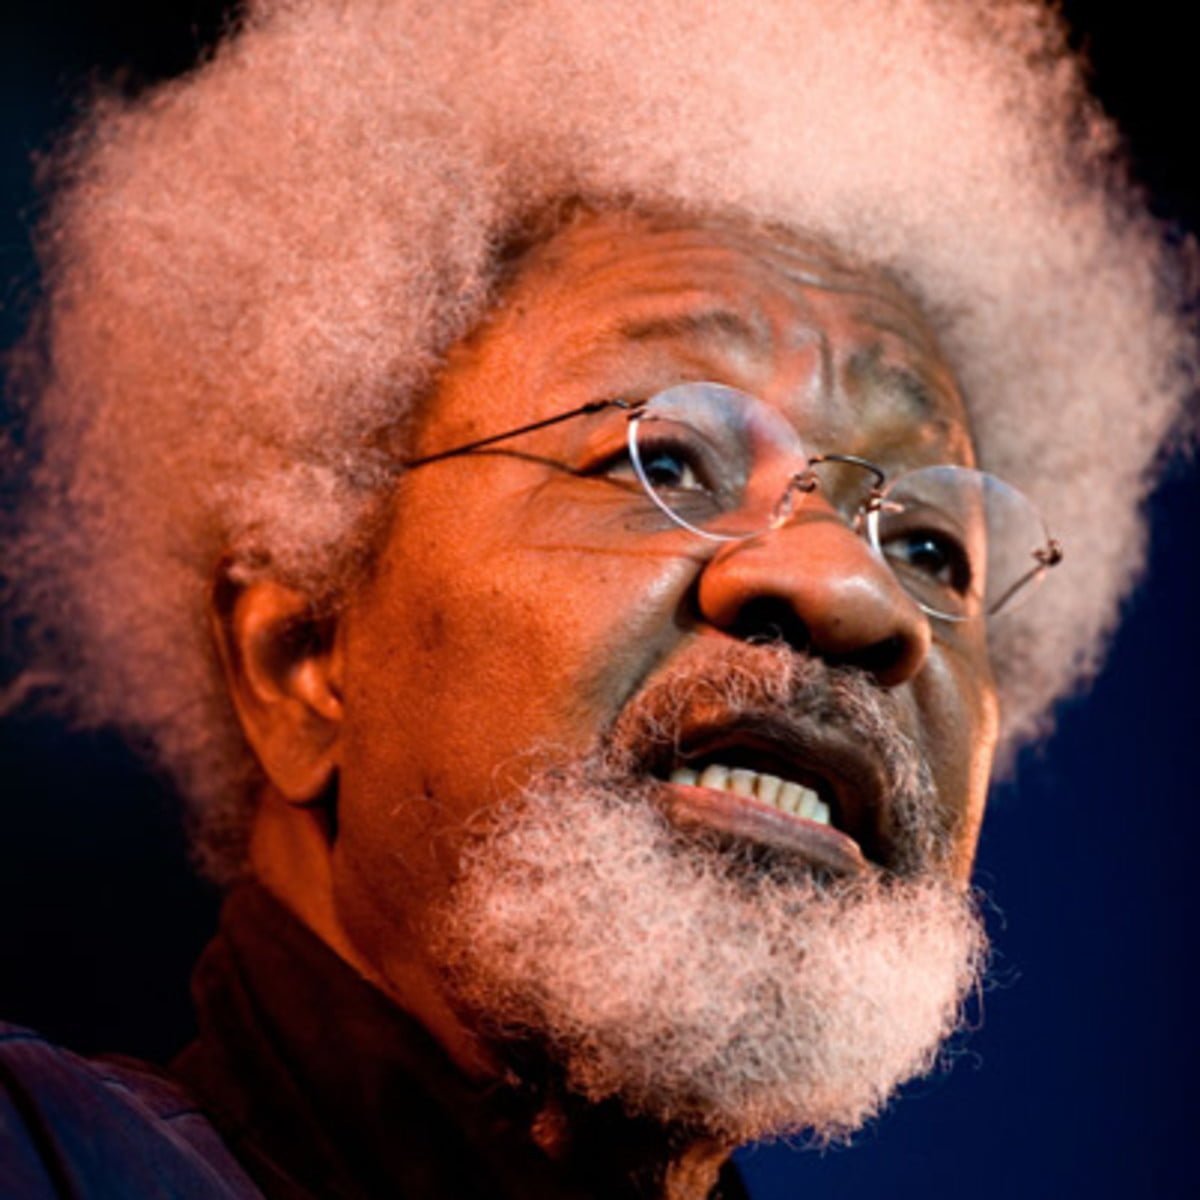 You're foolishly playing script of others - Soyinka chides Obidients